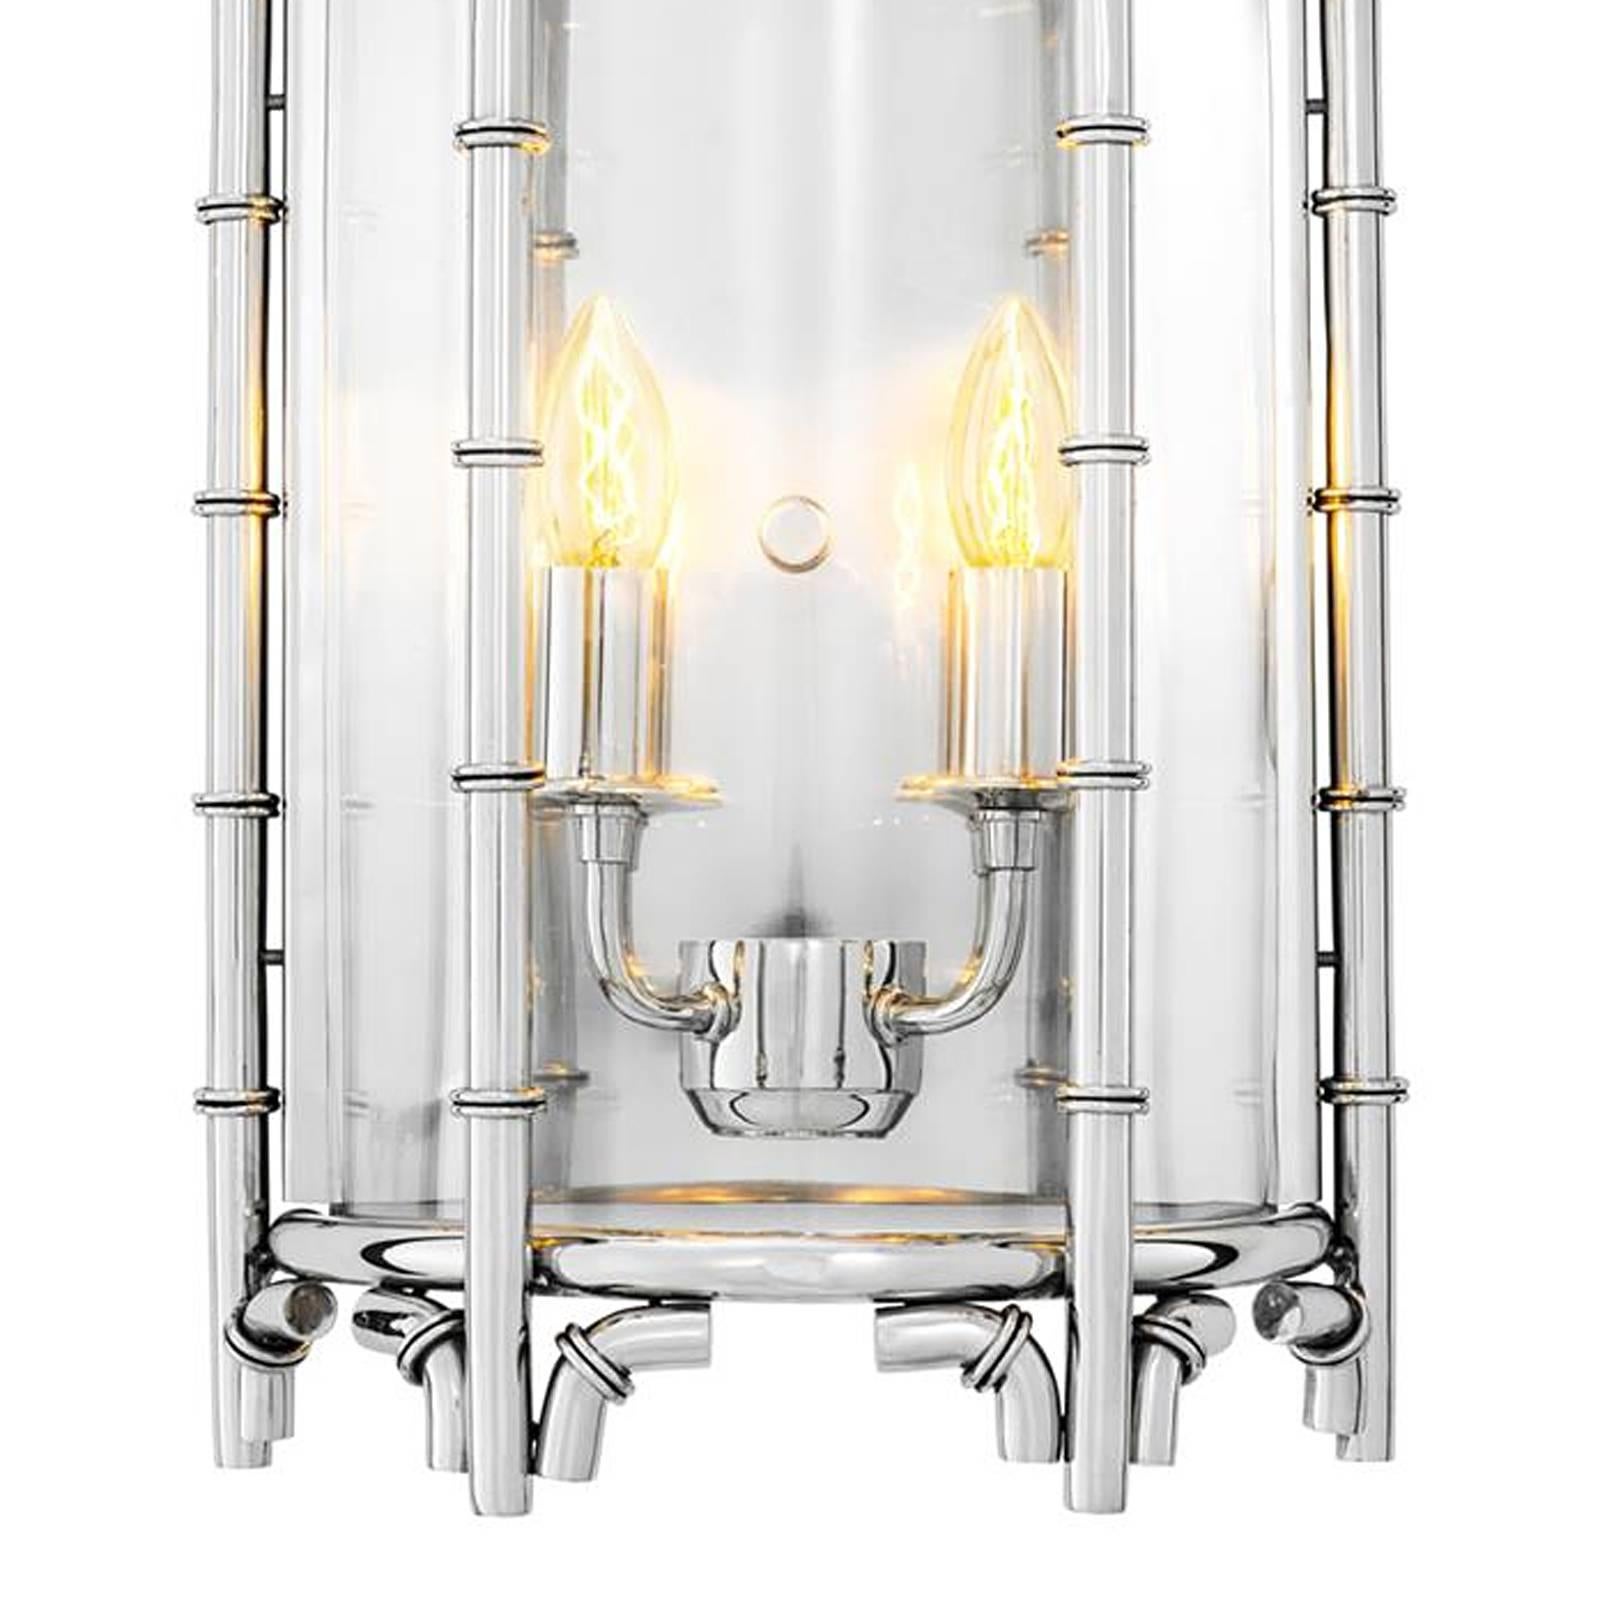 Indian Islands Wall Light in Polished Stainless Steel